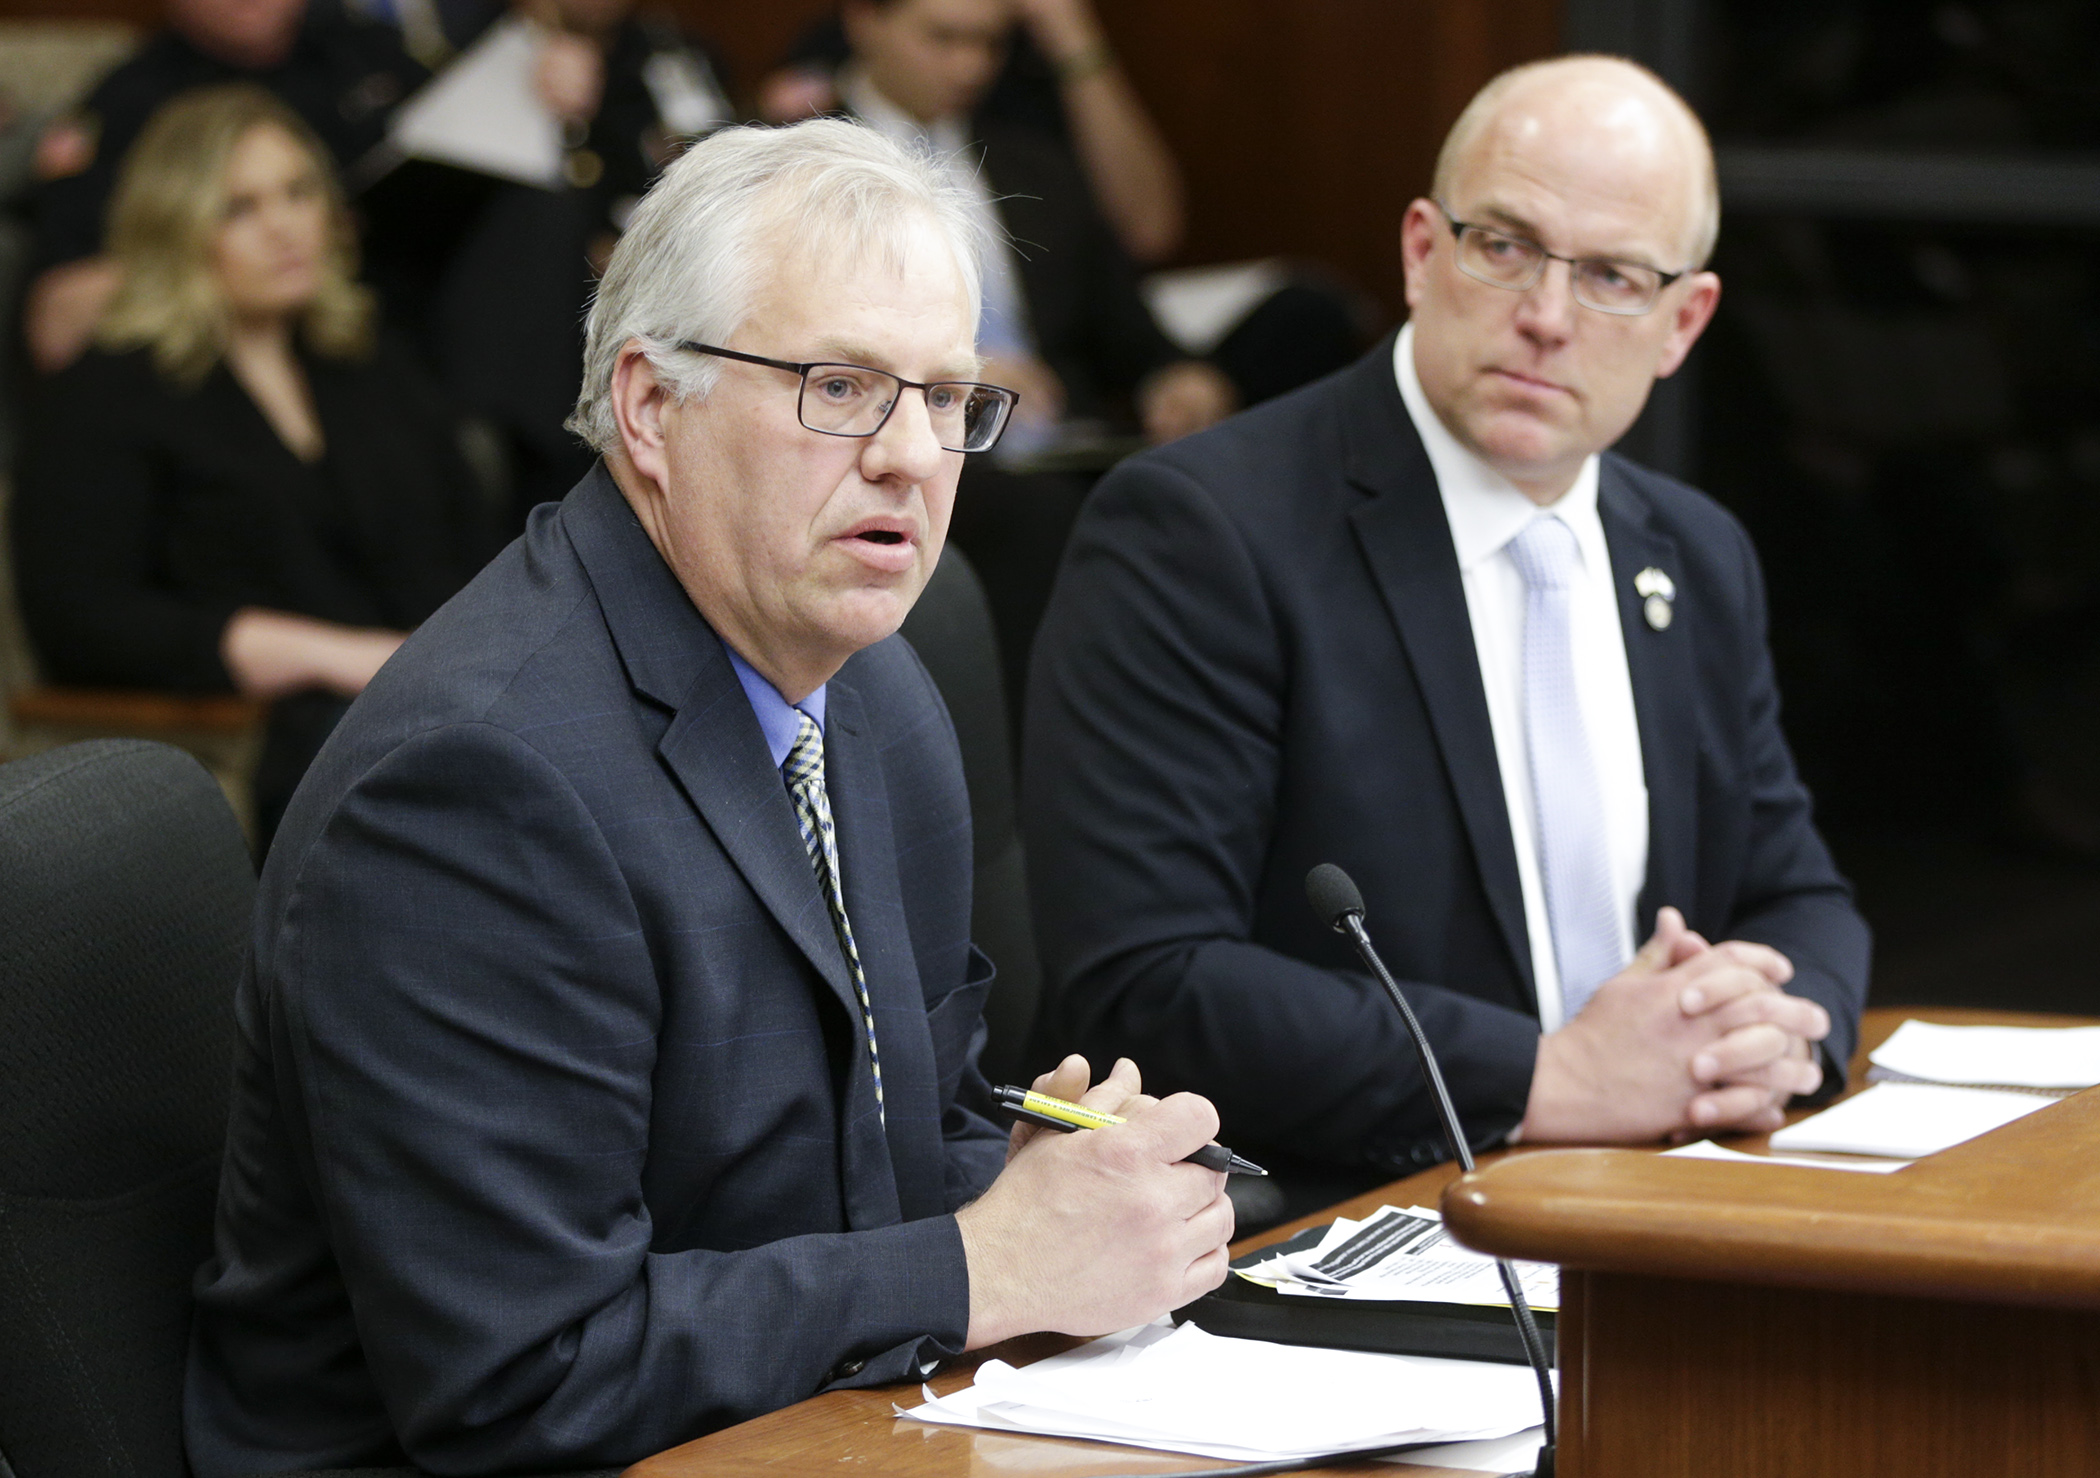 Swift County Commissioner Gary Hendrickx testifies before the House State Government Finance Committee on a bill sponsored by Rep. Tim Miller, right, to provide funding to acquire the Prairie Correctional Facility in Appleton. Photo by Paul Battaglia